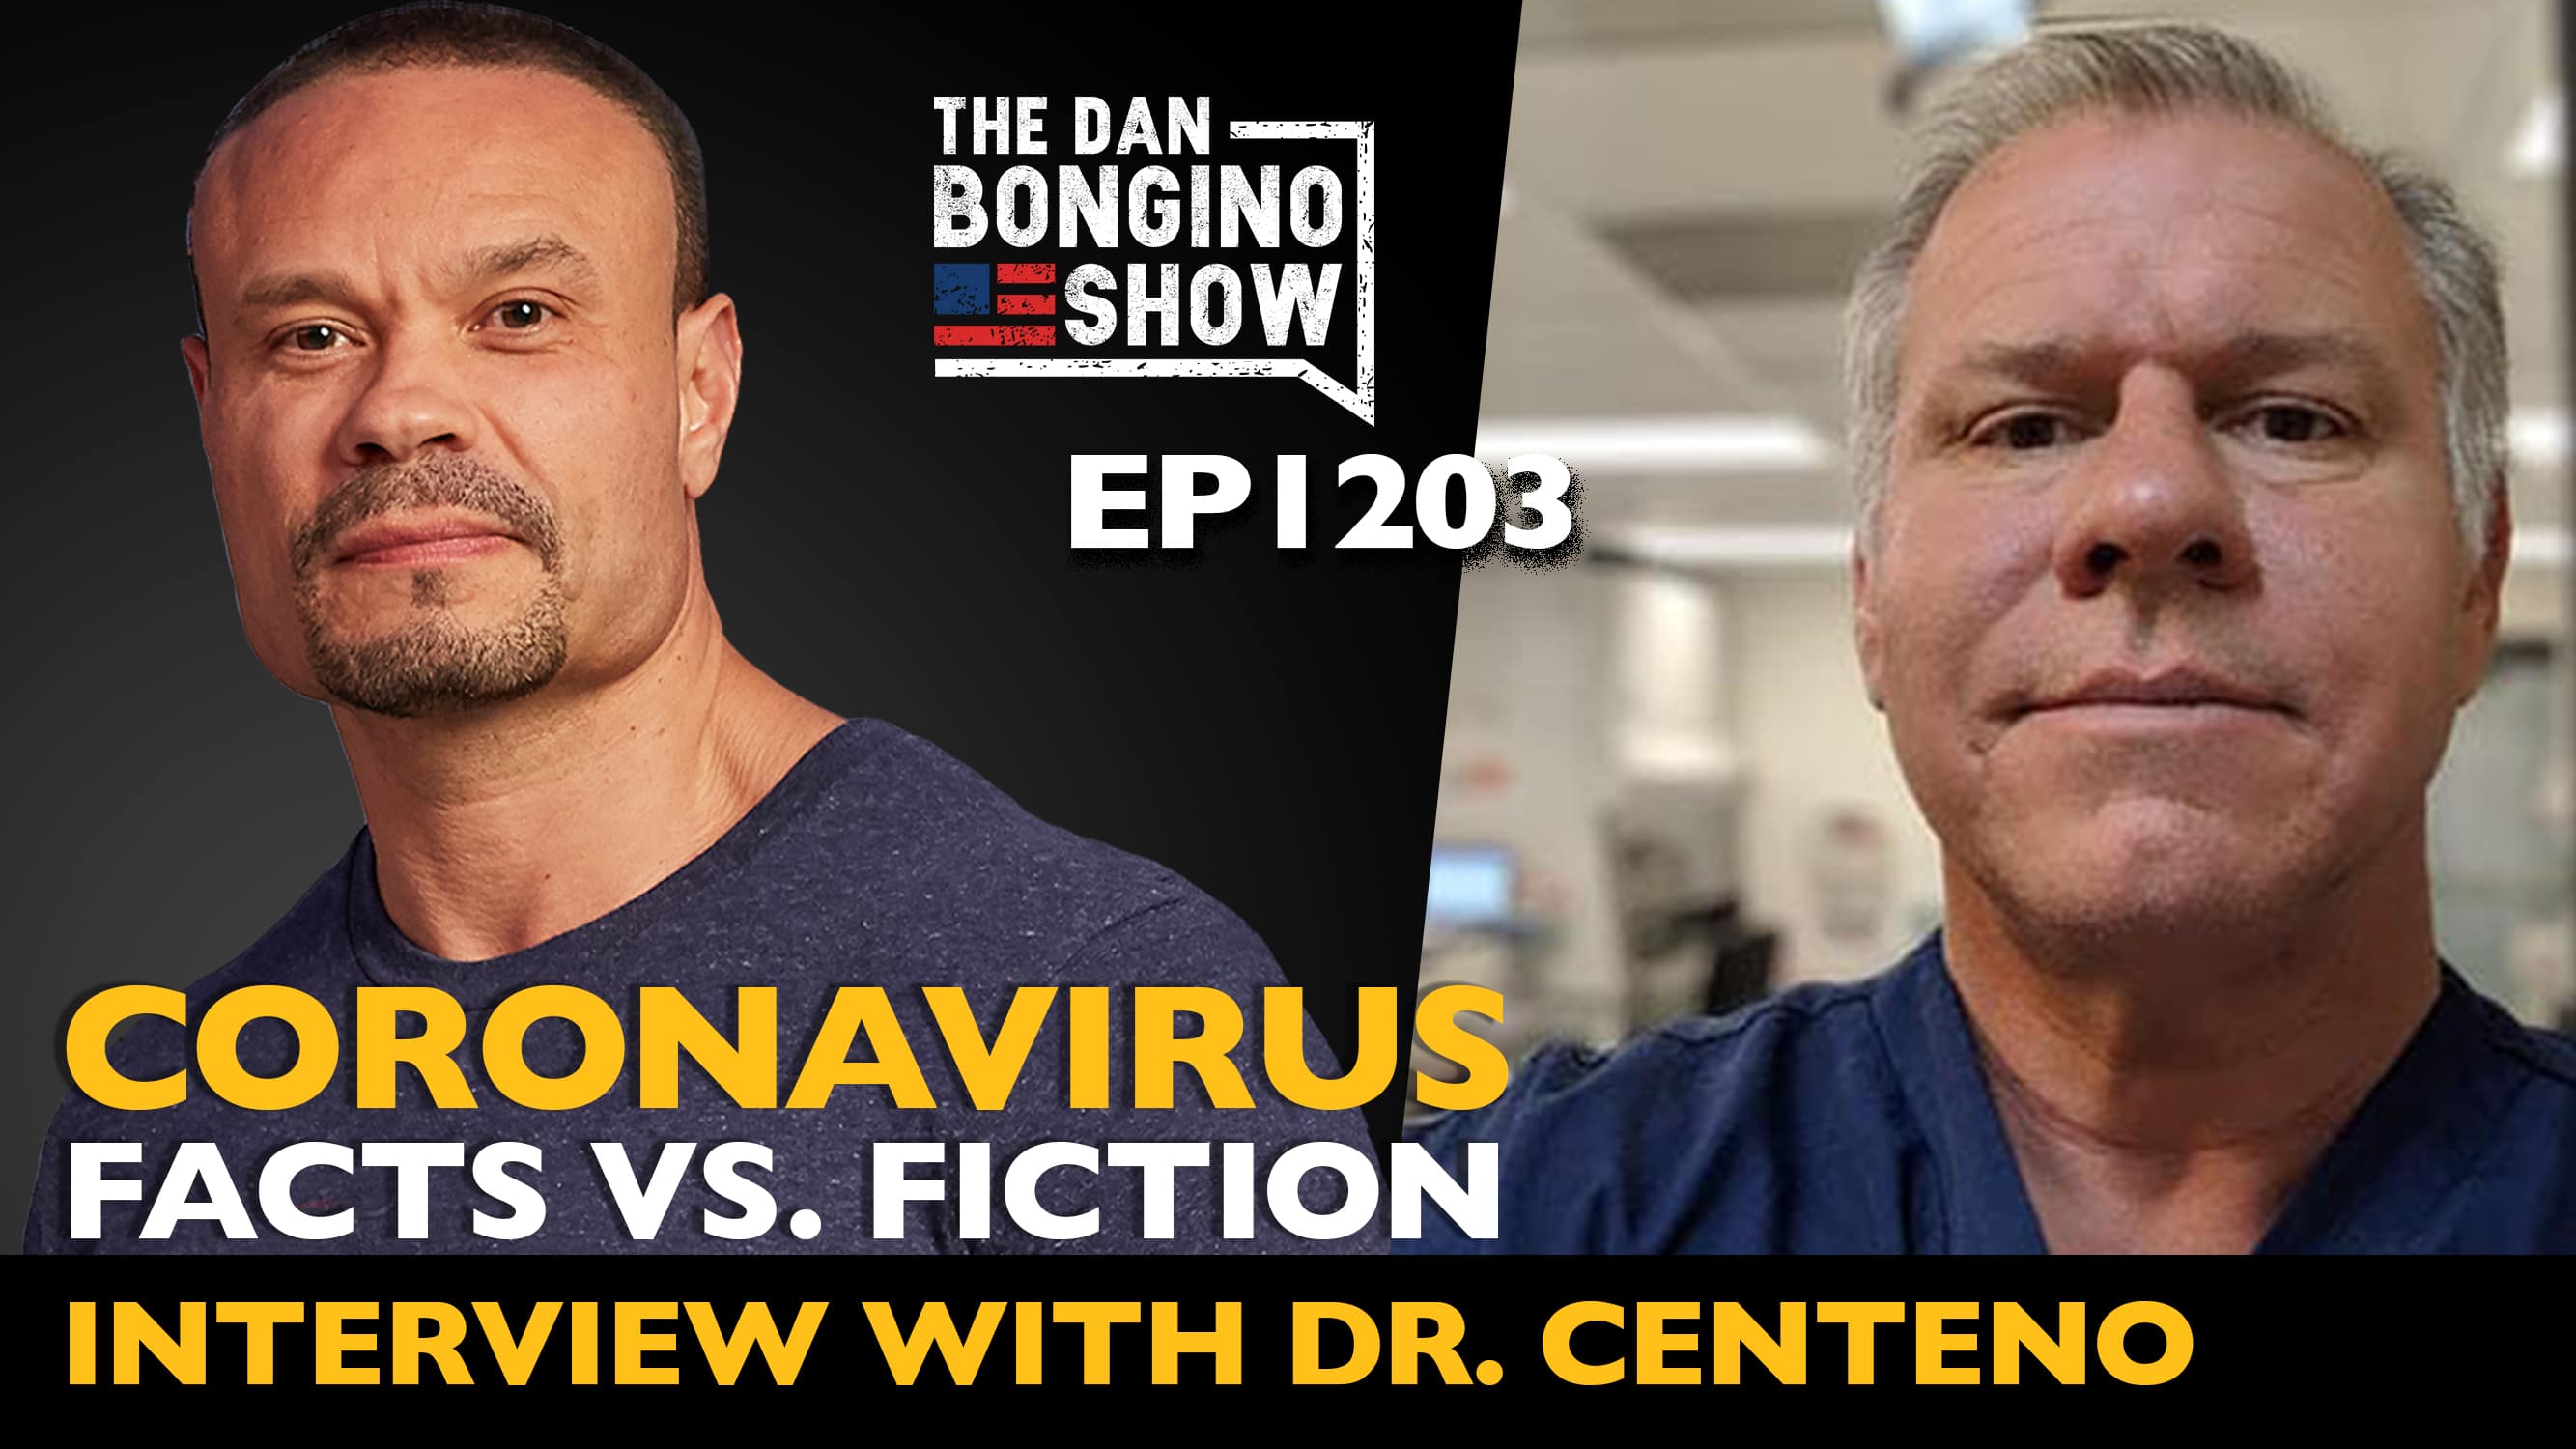 EP 1203 Coronavirus Facts vs. Fiction Interview with Dr. Centeno